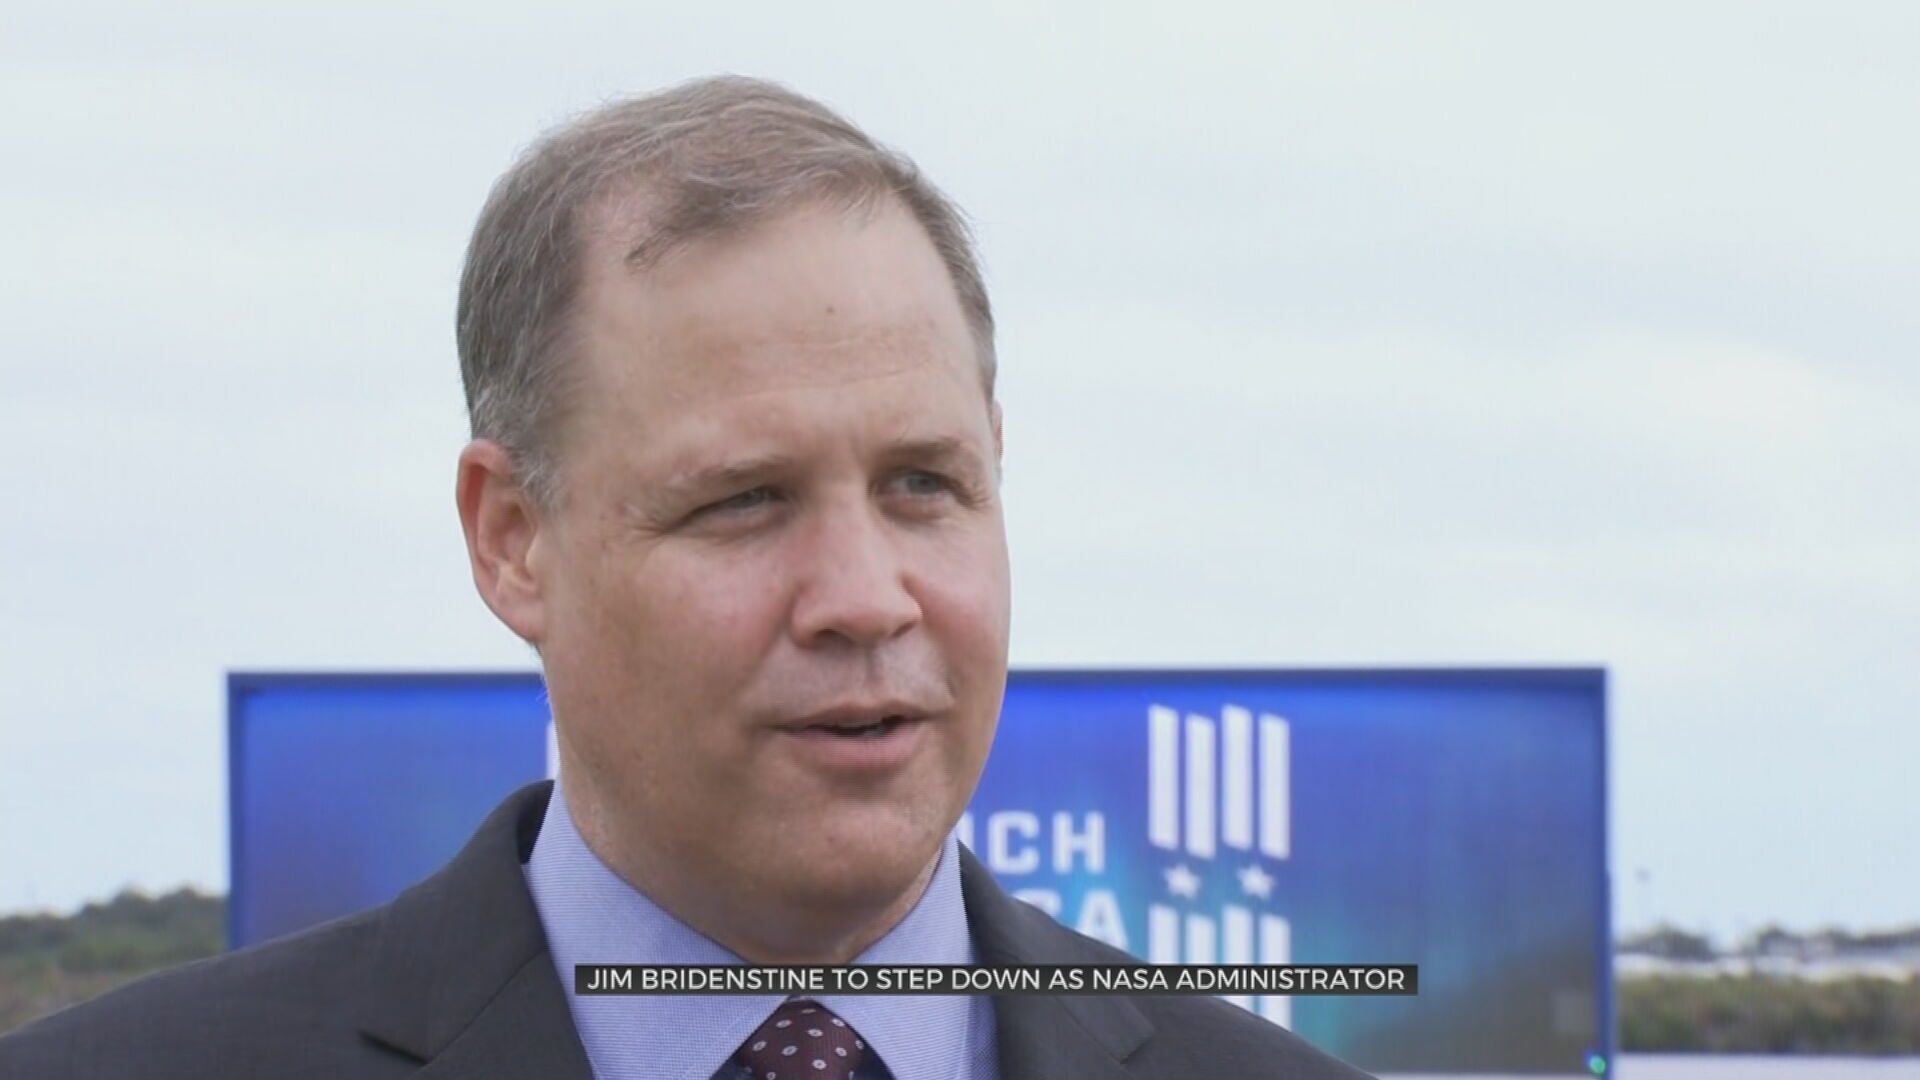 Bridenstine To Step Down As NASA Administrator, Says Will Stay In Oklahoma Moving Forward